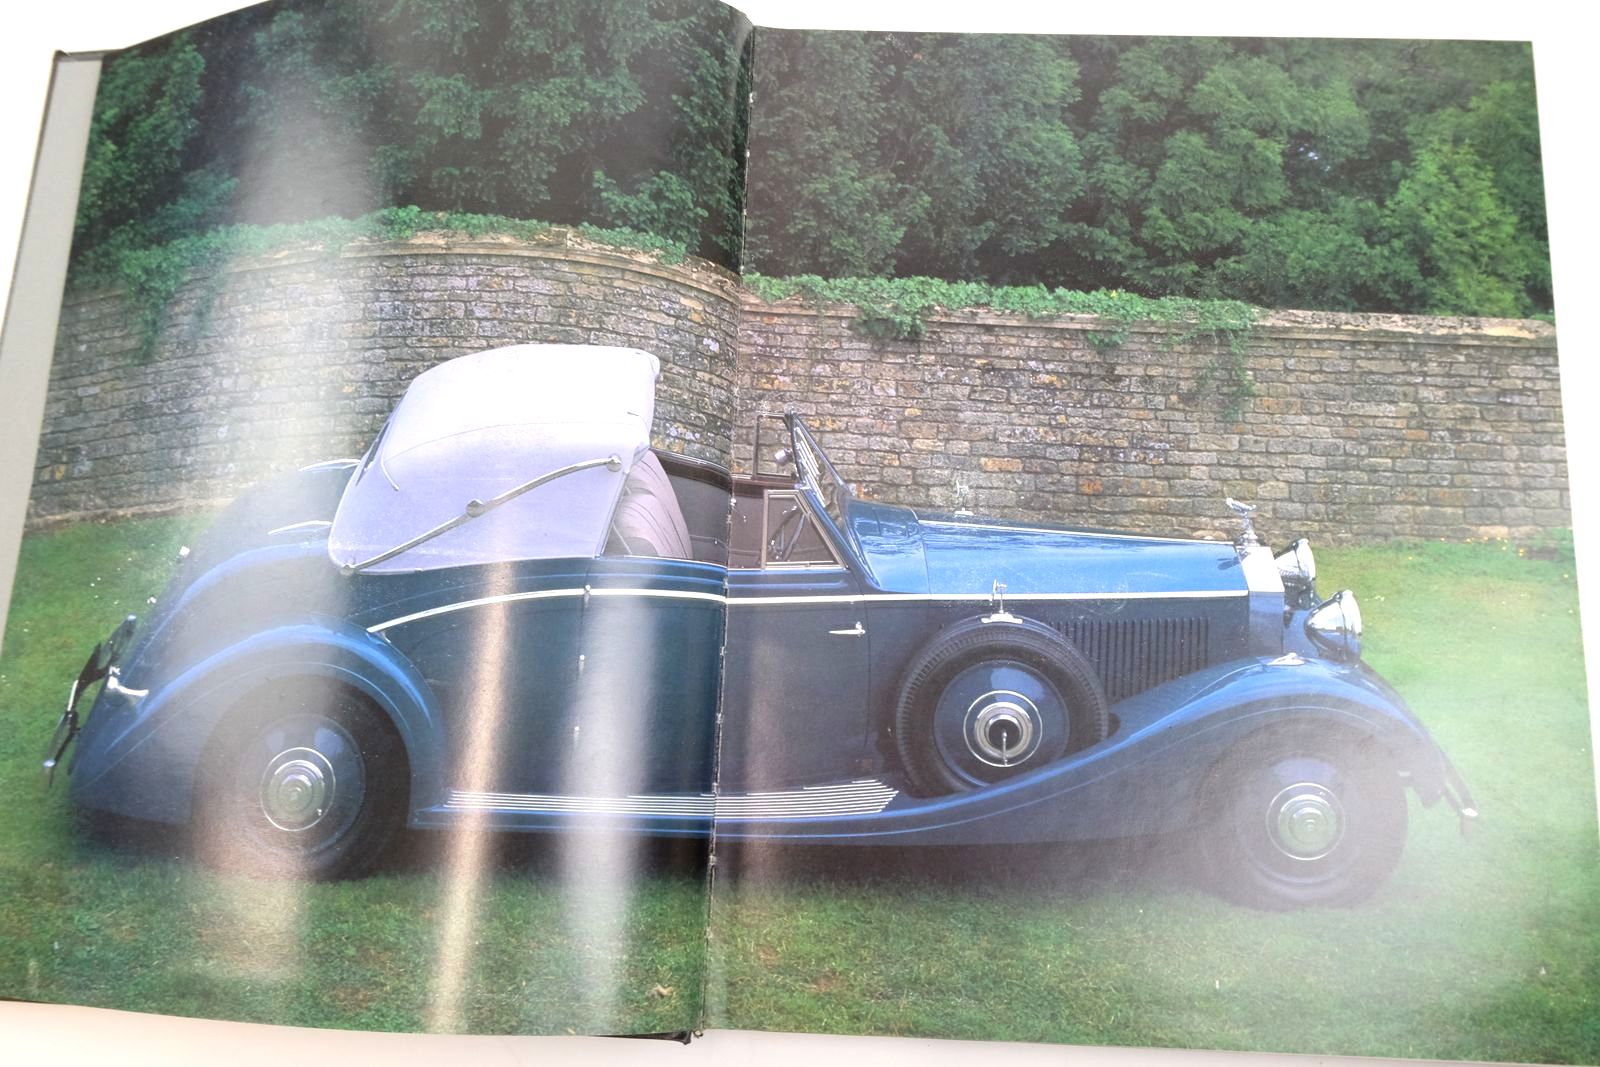 Photo of ROLLS-ROYCE AND BENTLEY written by Robfeldt, Klaus-Josef published by Foulis, Haynes Publishing Group (STOCK CODE: 2139326)  for sale by Stella & Rose's Books